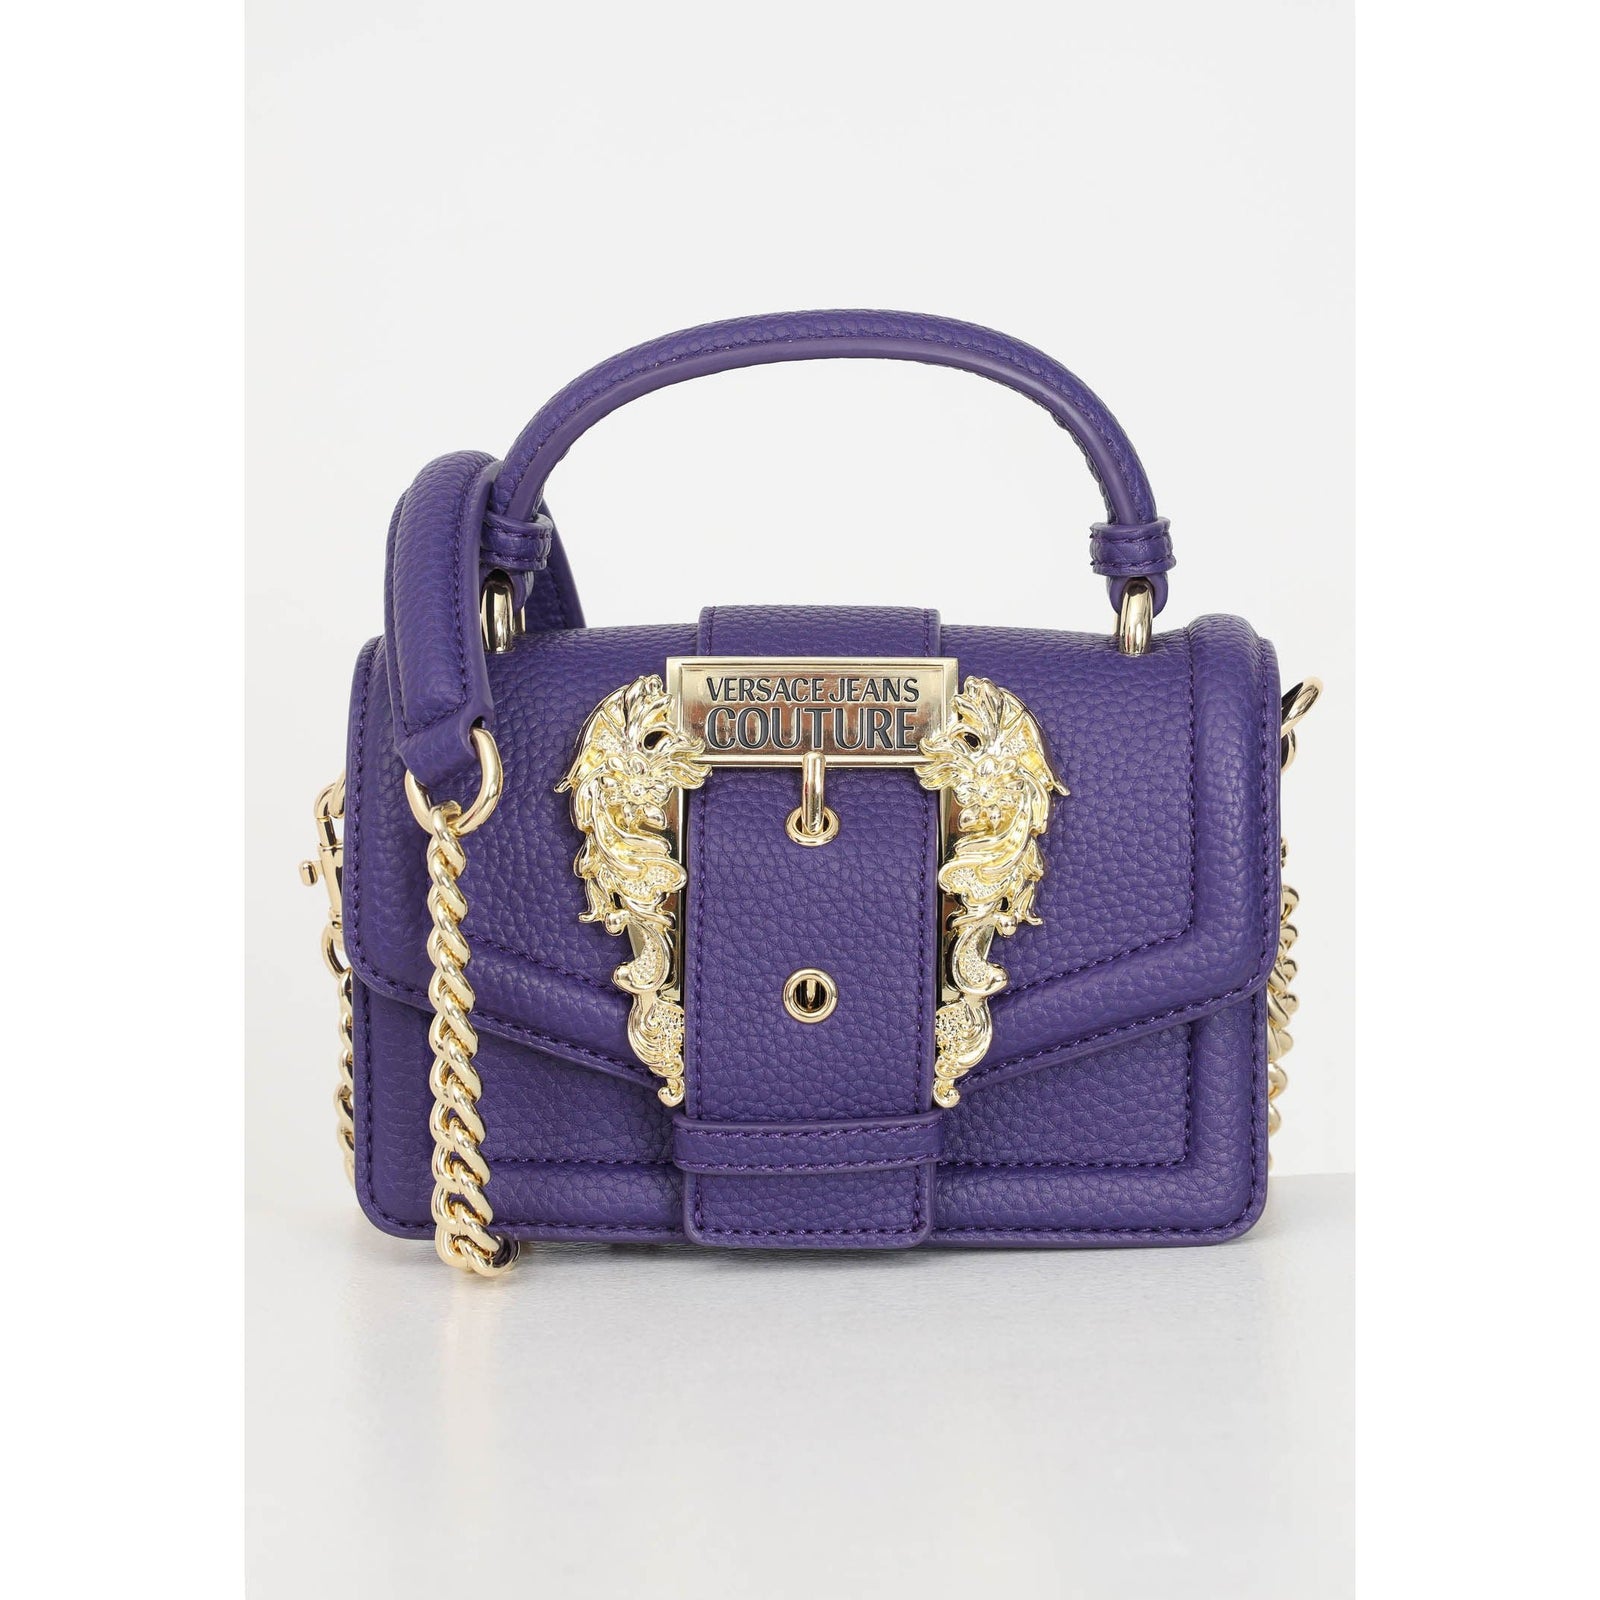 VERSACE JEANS COUTURE BAG WITH MAXI SHOULDER BUCKLE - Yooto